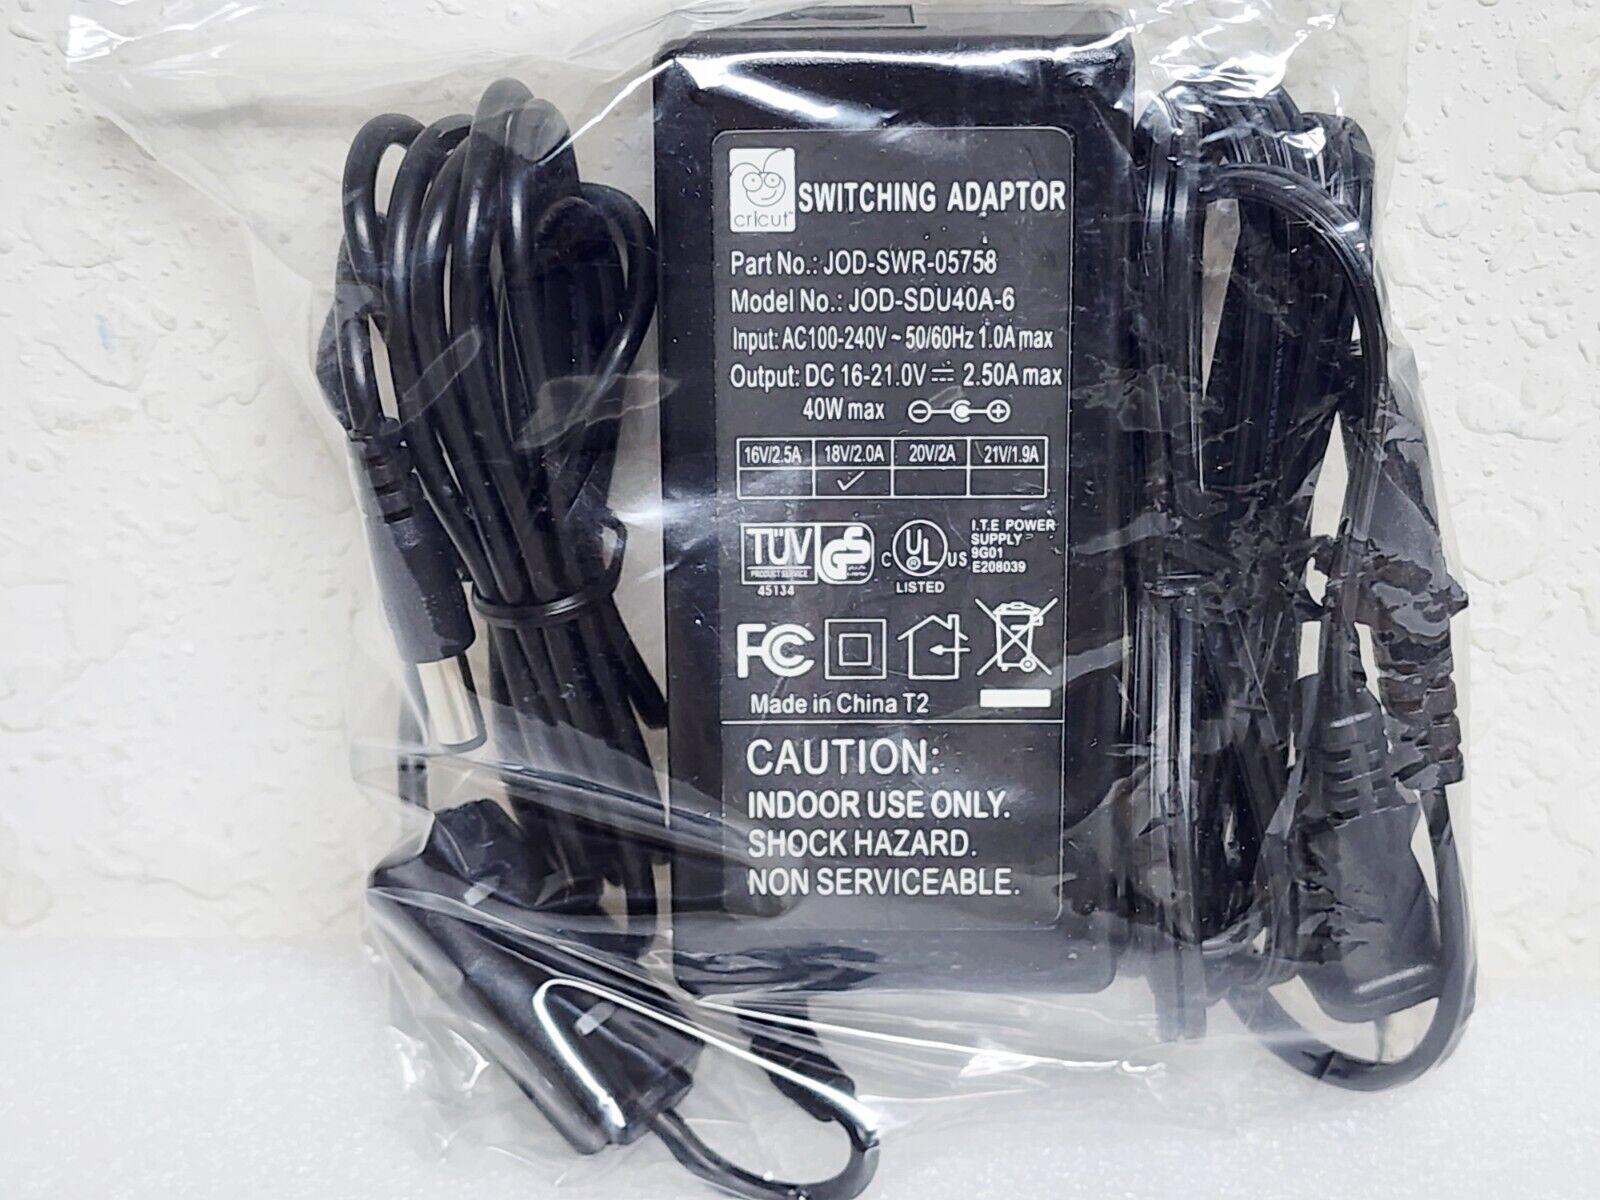 Genuin Cricut AC/DC Switching 40W Adapter Charger 6-21.0V, 2.50A -JOD-SWR-05758